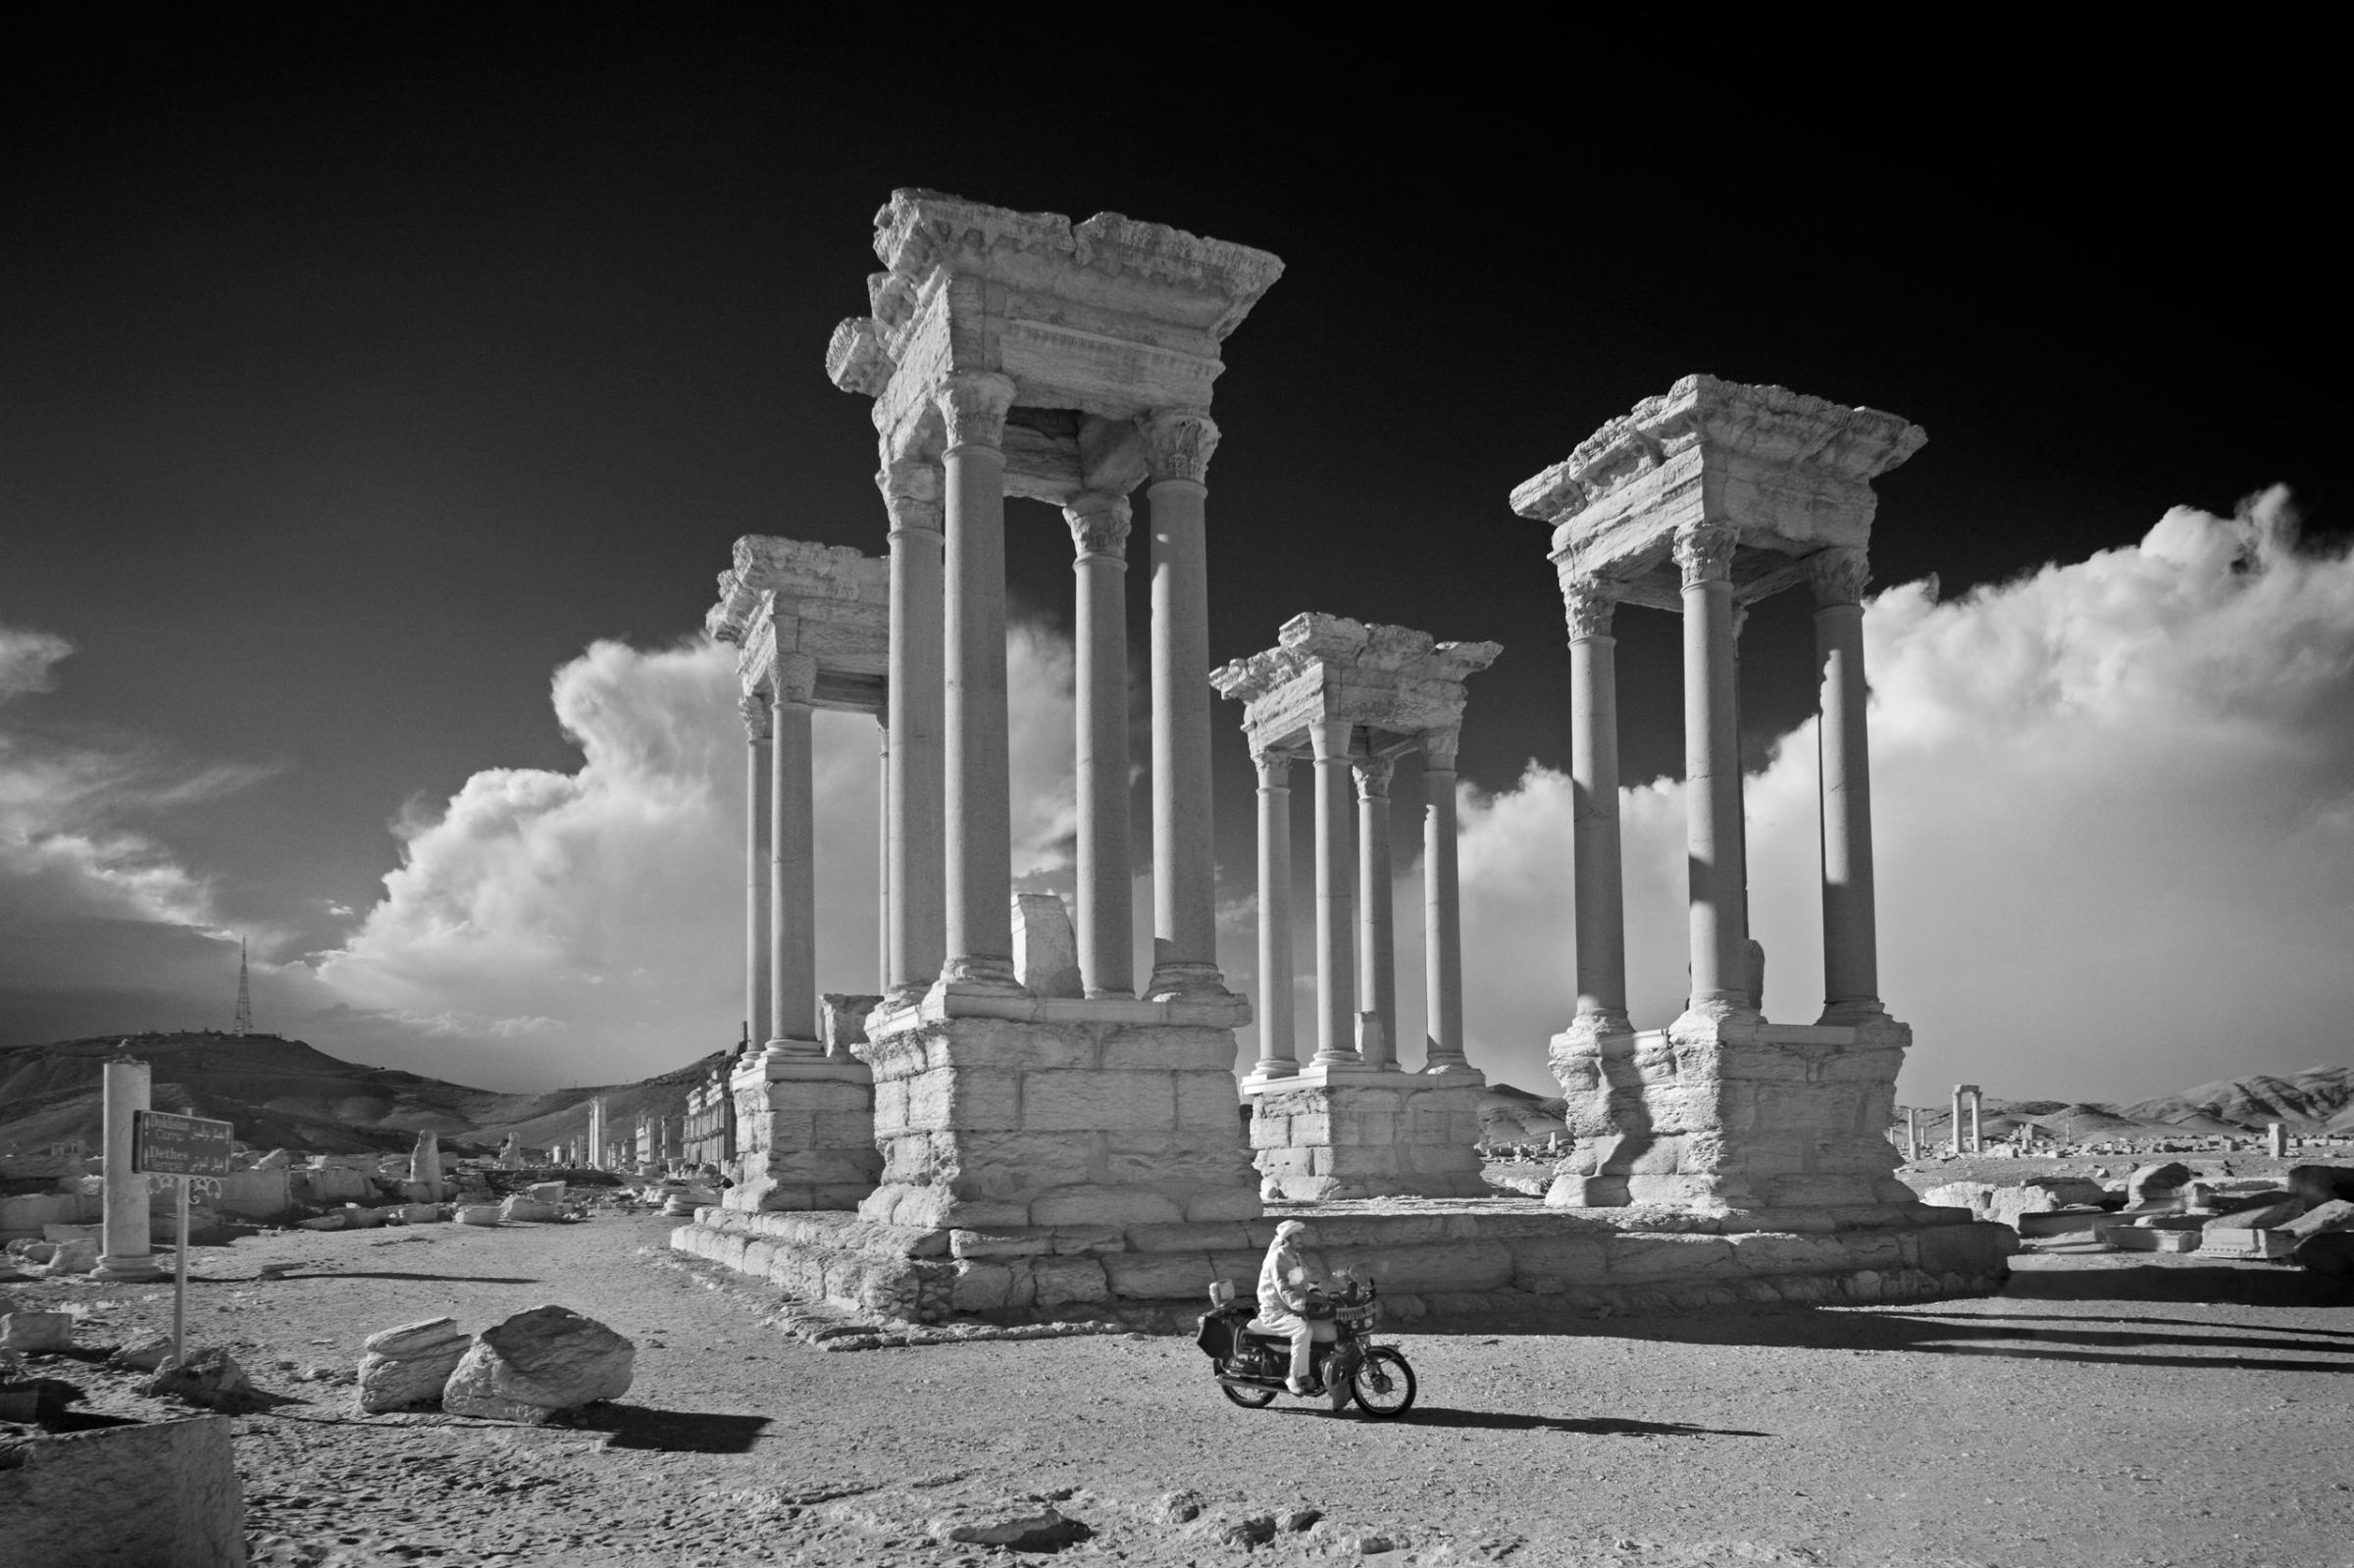 The Tetrapylon, in Syria’s ancient city of Palmyra, 2009.They were built as landmarks at significant crossroads or geographical 'focal points', as a 'sub-type' of the Roman triumphal arch.